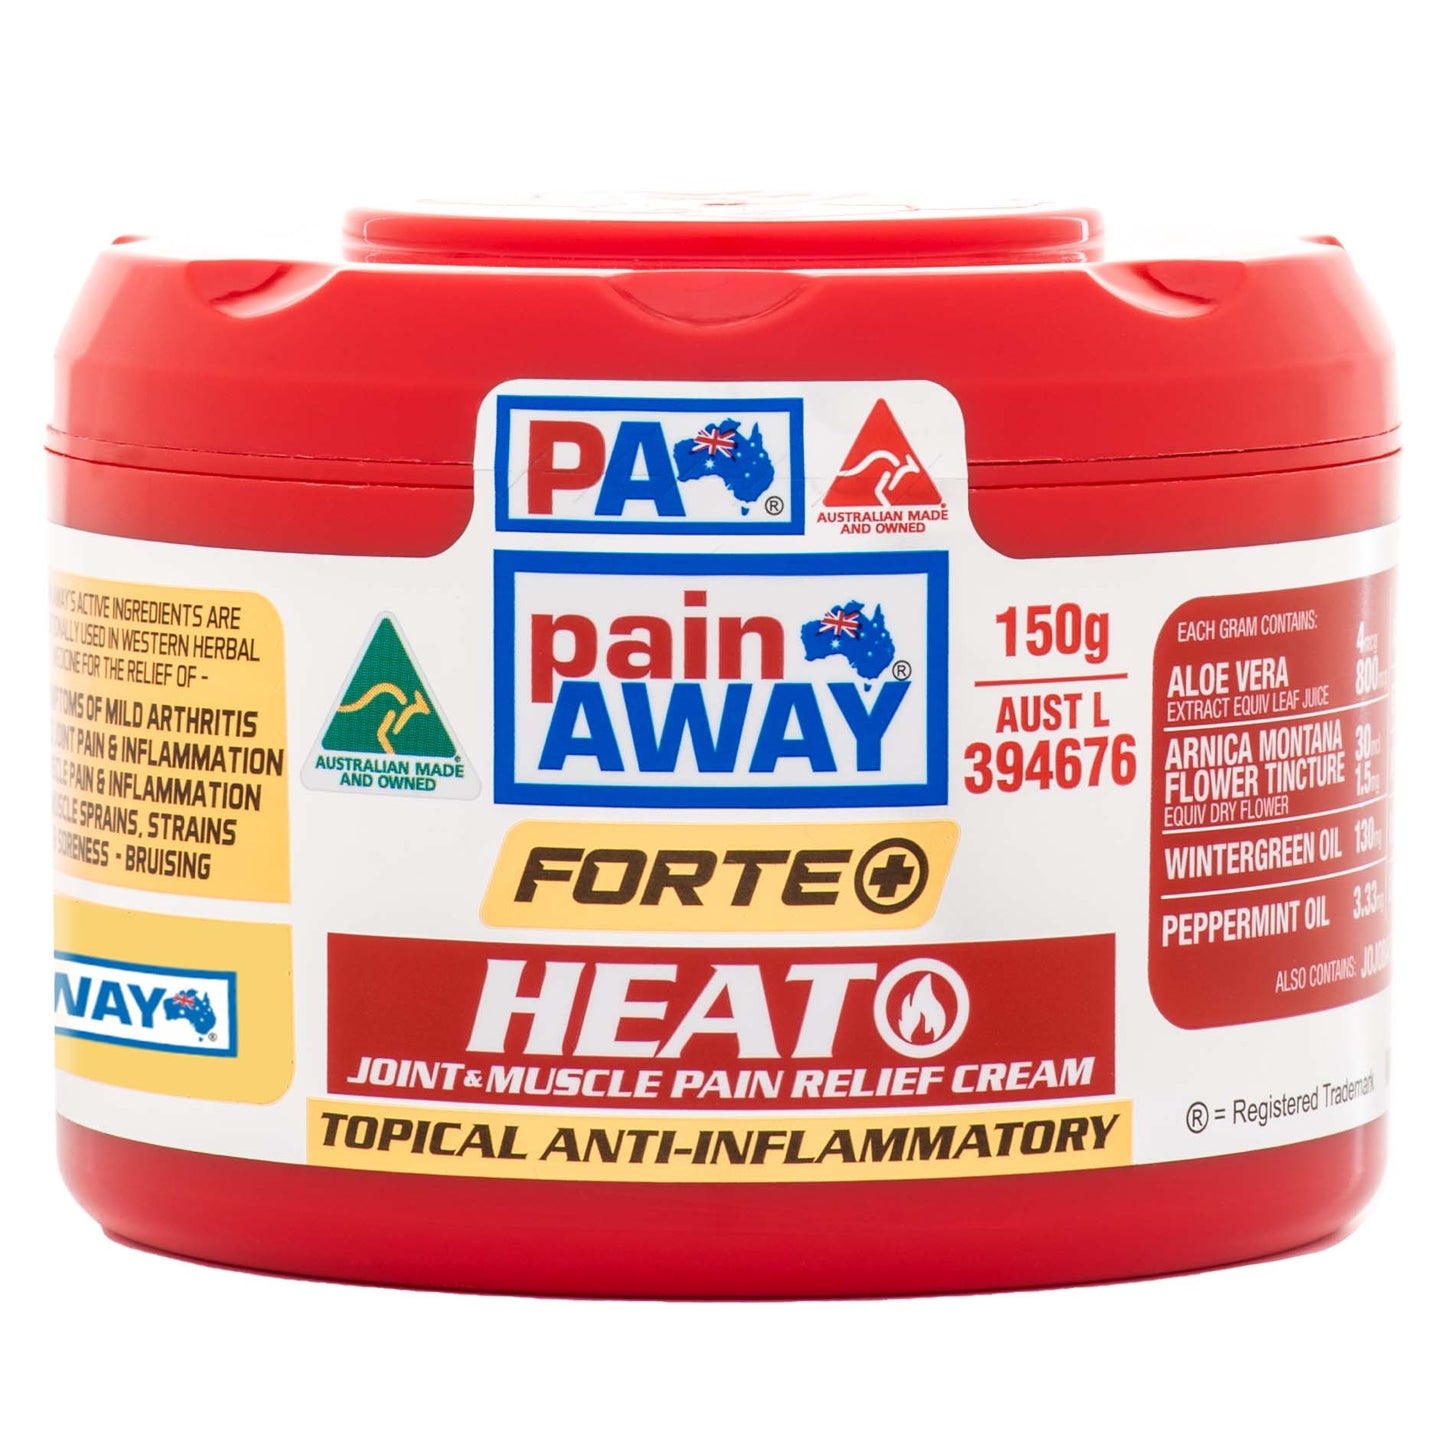 PAIN AWAY HEAT JOINT & MUSCLE PAIN RELIEF CREAM 150G TUB